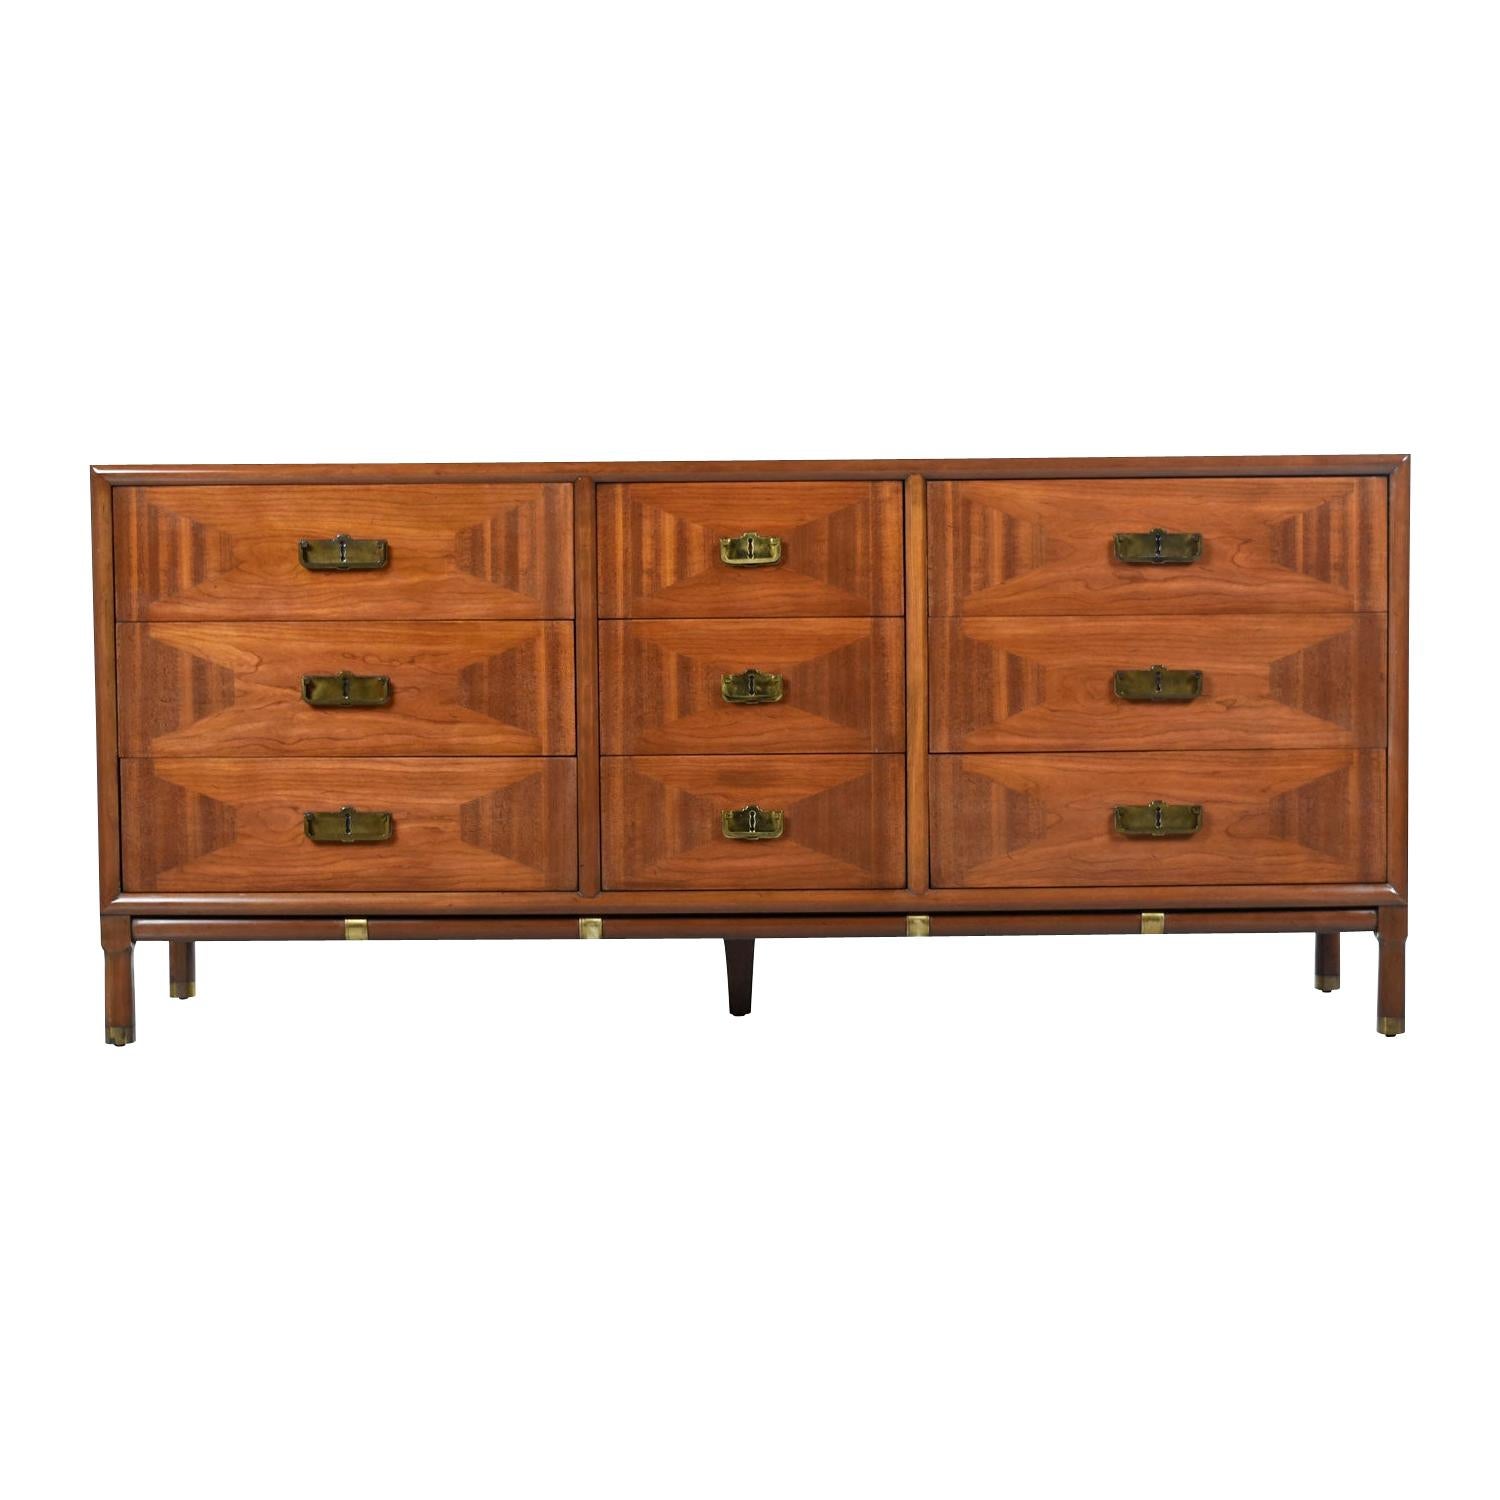 Cherry and Olive Wood Inlay Thomasville Campaign Style Talisman Dresser Credenza